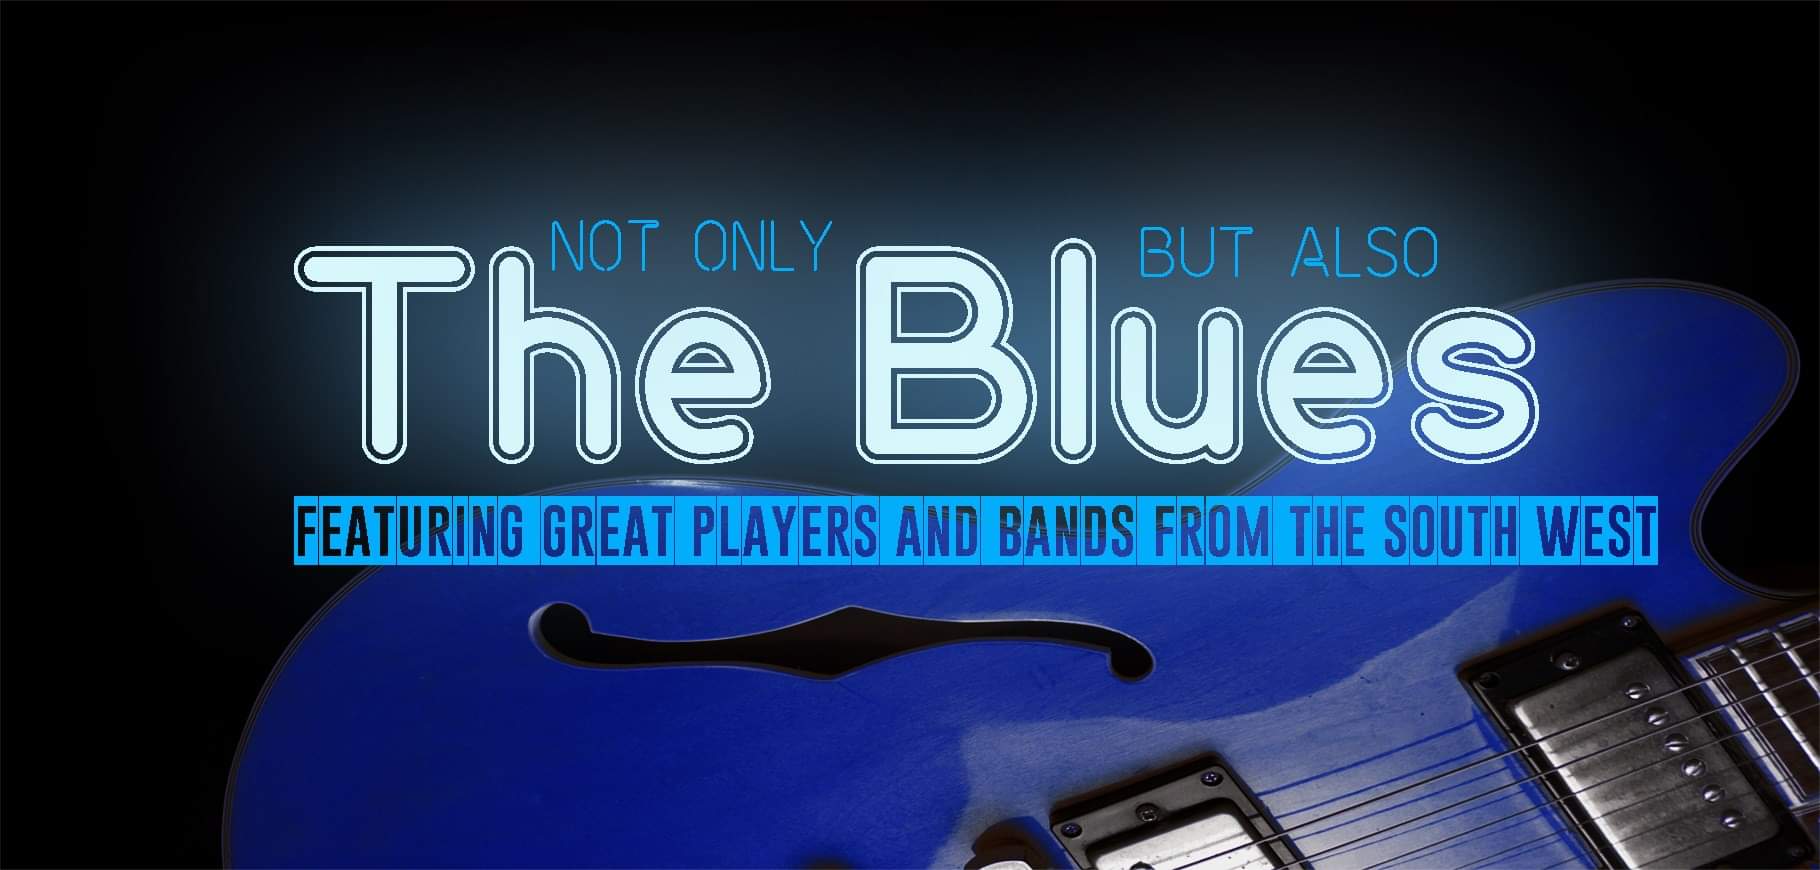 Not Only But Also The Blues: Russell Sinclair, Celatone, Rhythm Doctors